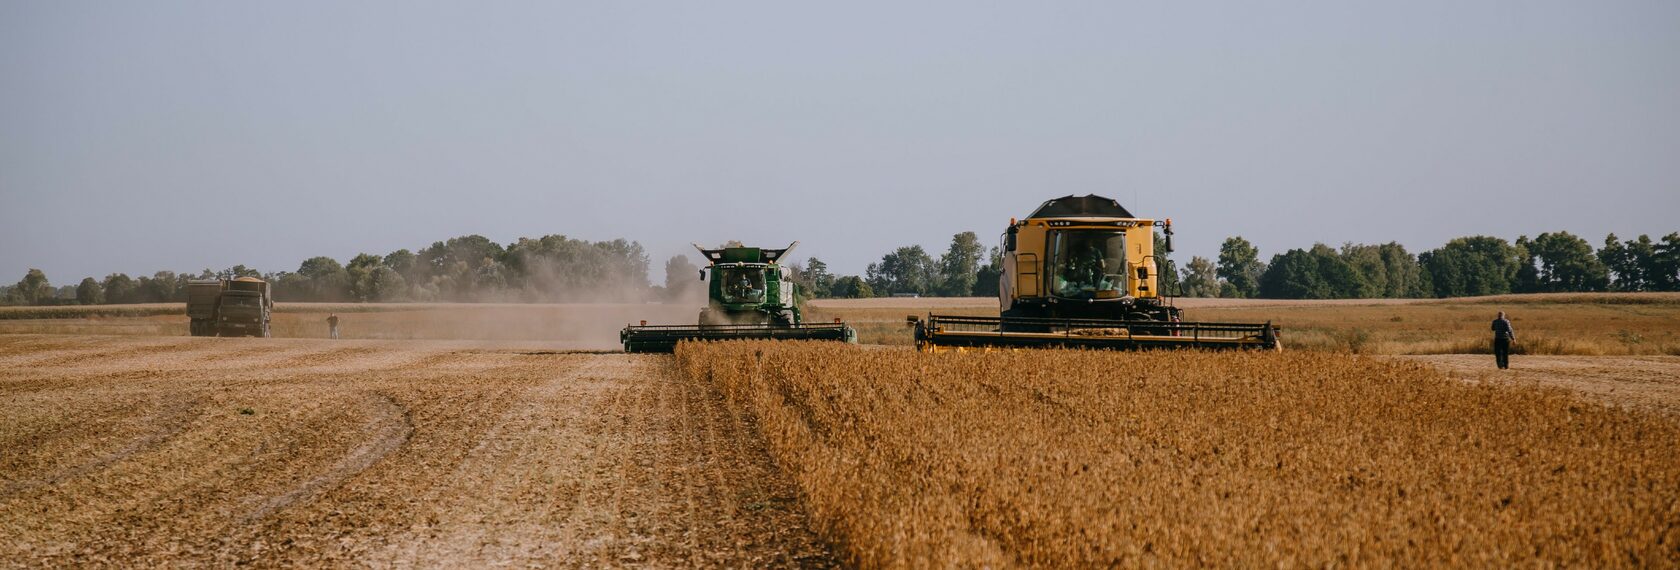 A.G.R. Group combine harvesters in a soybean field